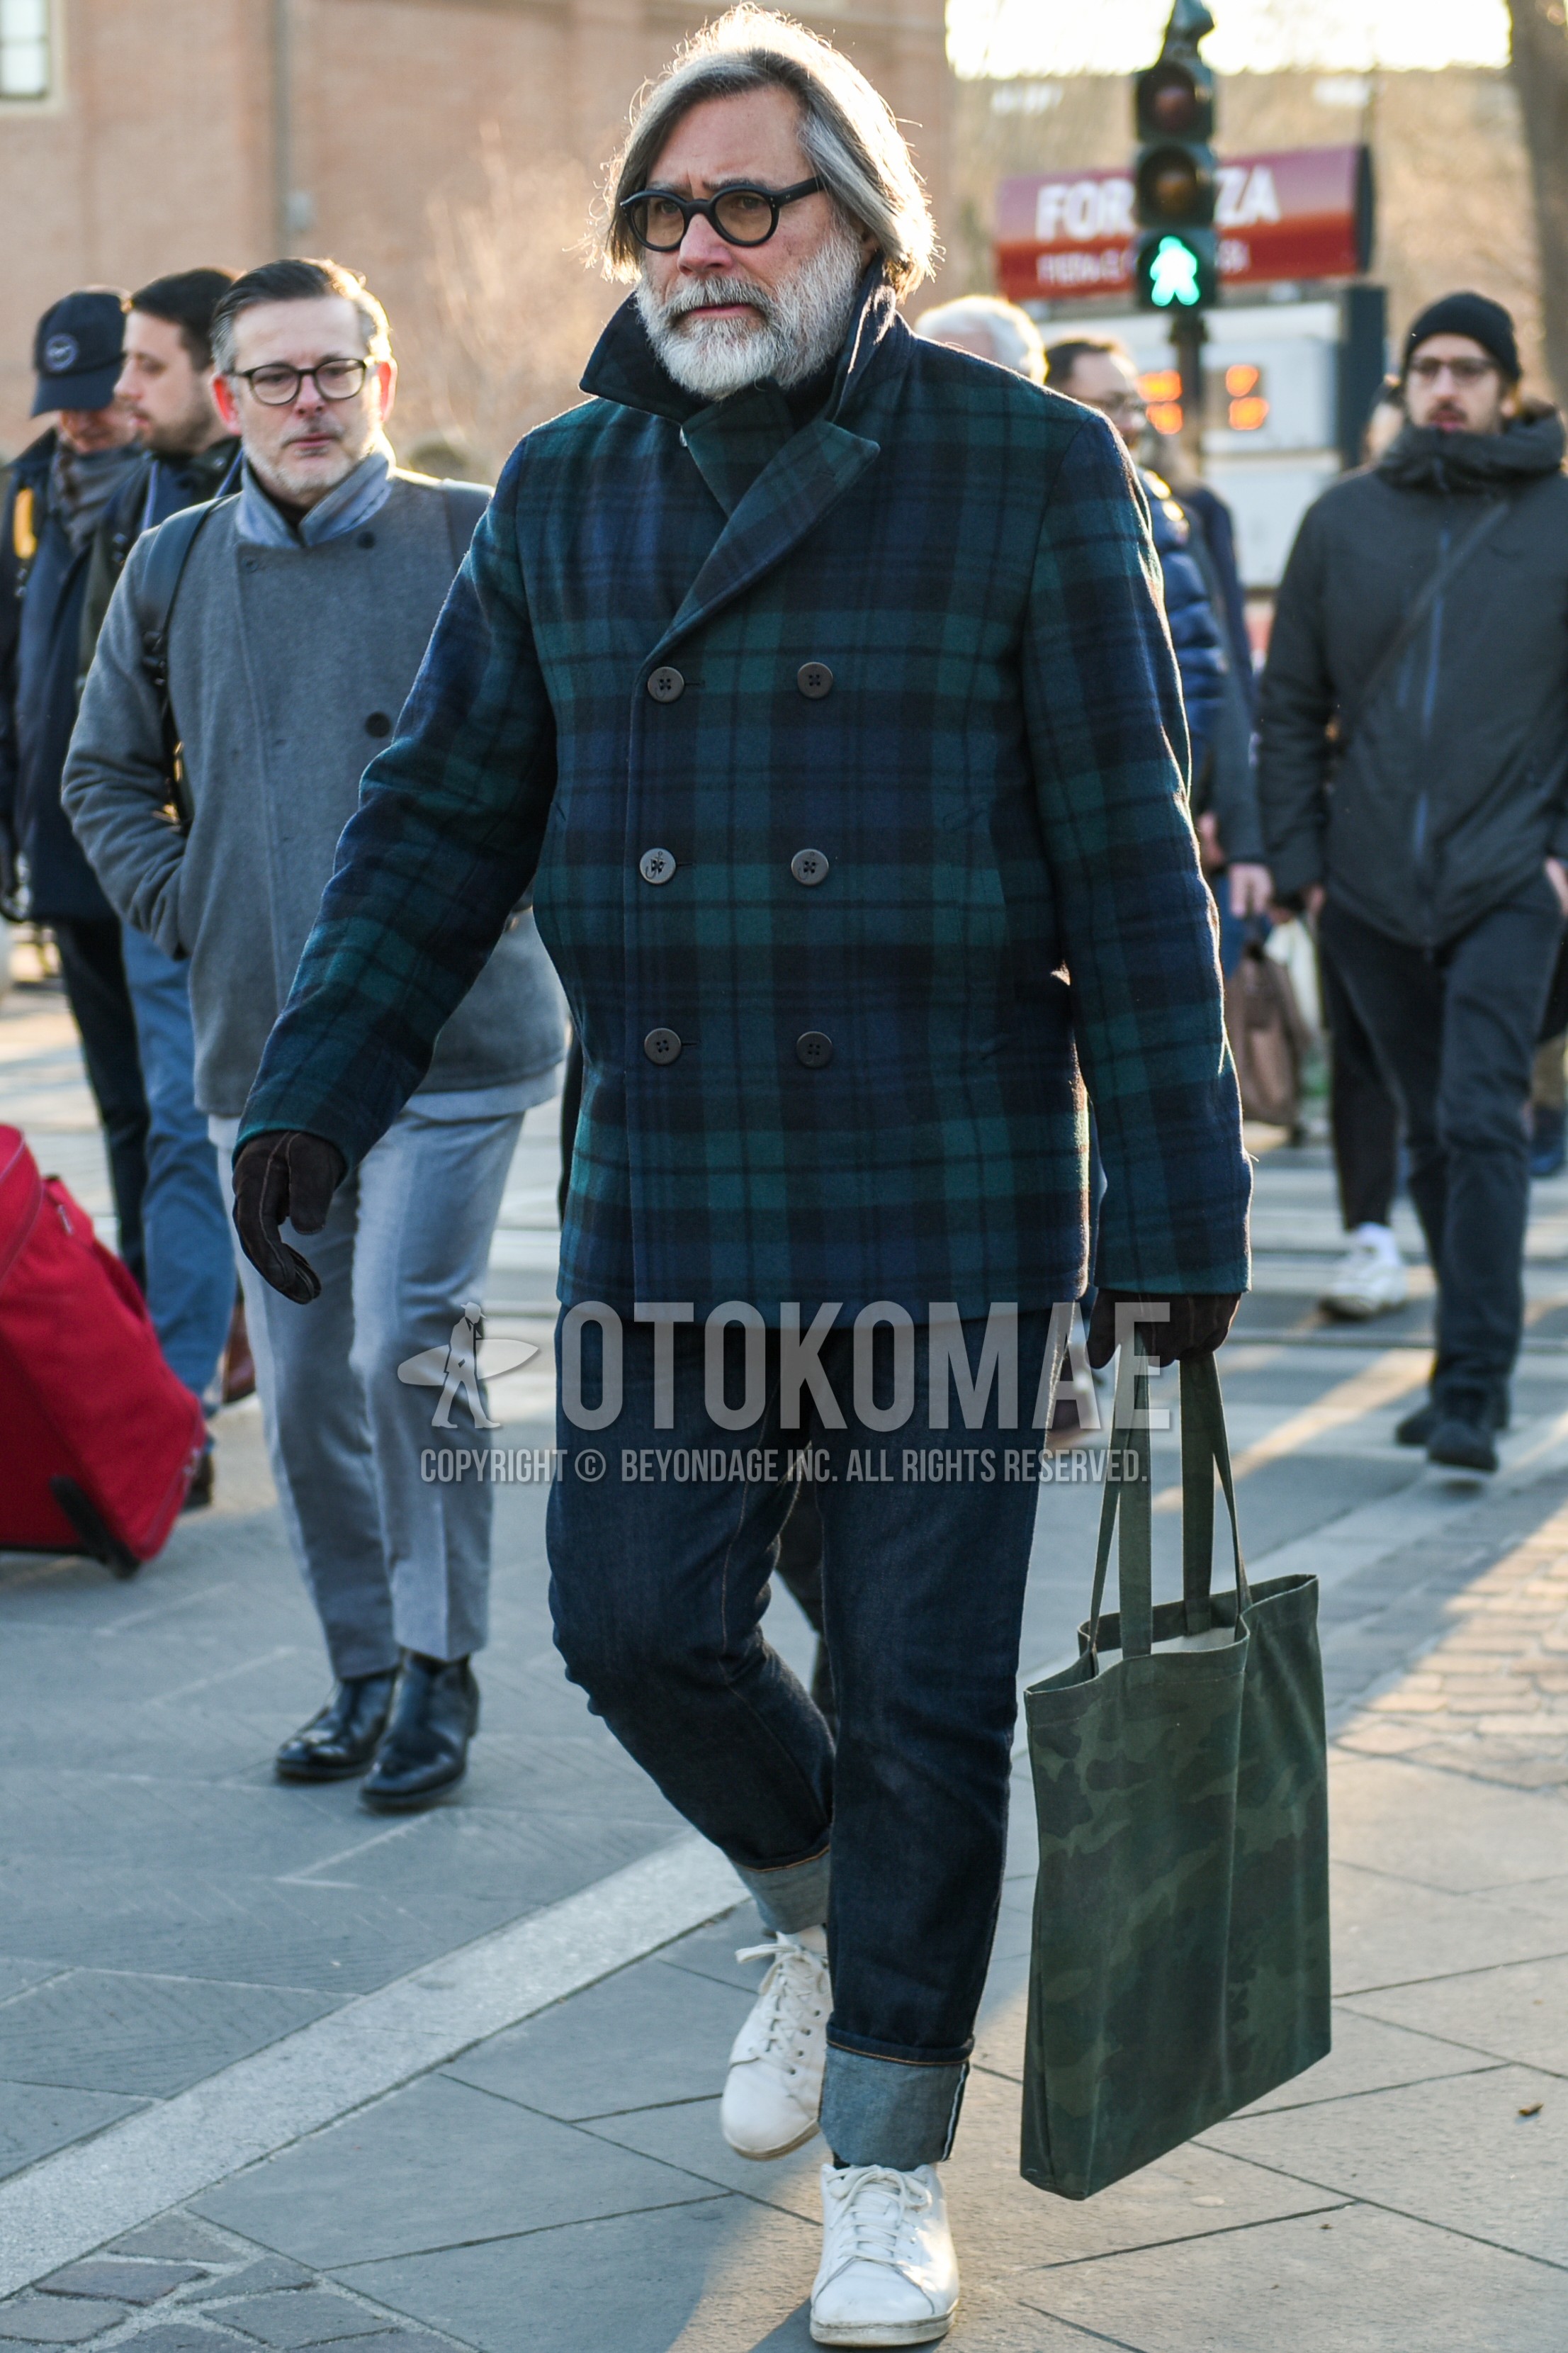 Men's autumn winter outfit with black plain sunglasses, olive green navy check p coat, navy plain denim/jeans, white low-cut sneakers, olive green camouflage tote bag.